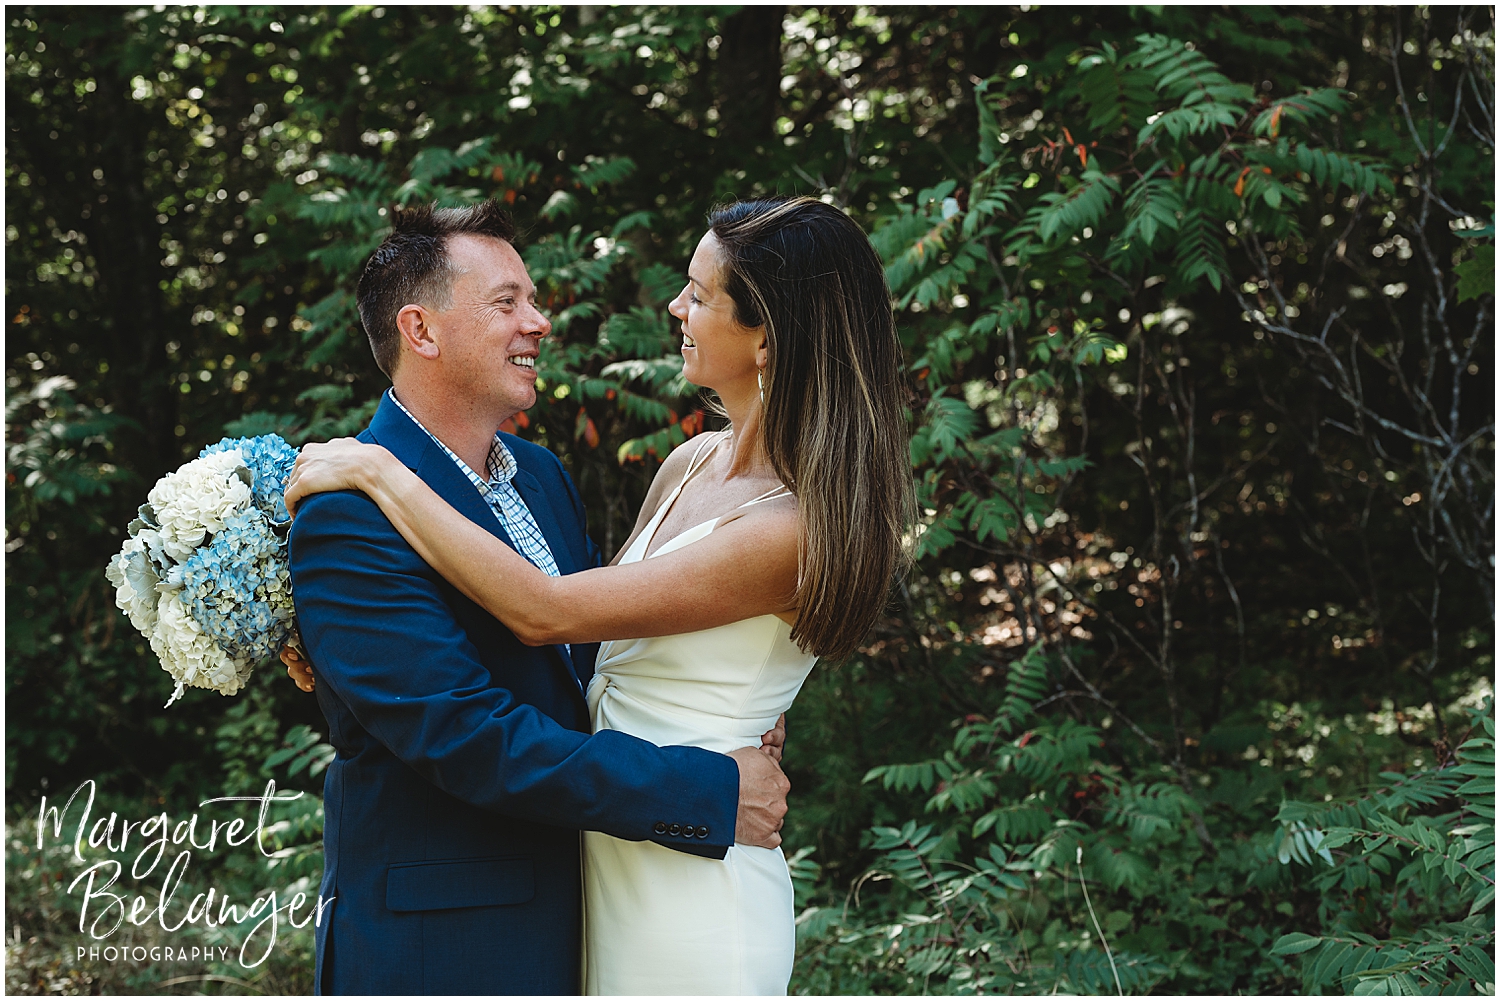 A happy couple embracing in a wooded area, with the bride on the right holding a bouquet of blue and white hydrangeas.